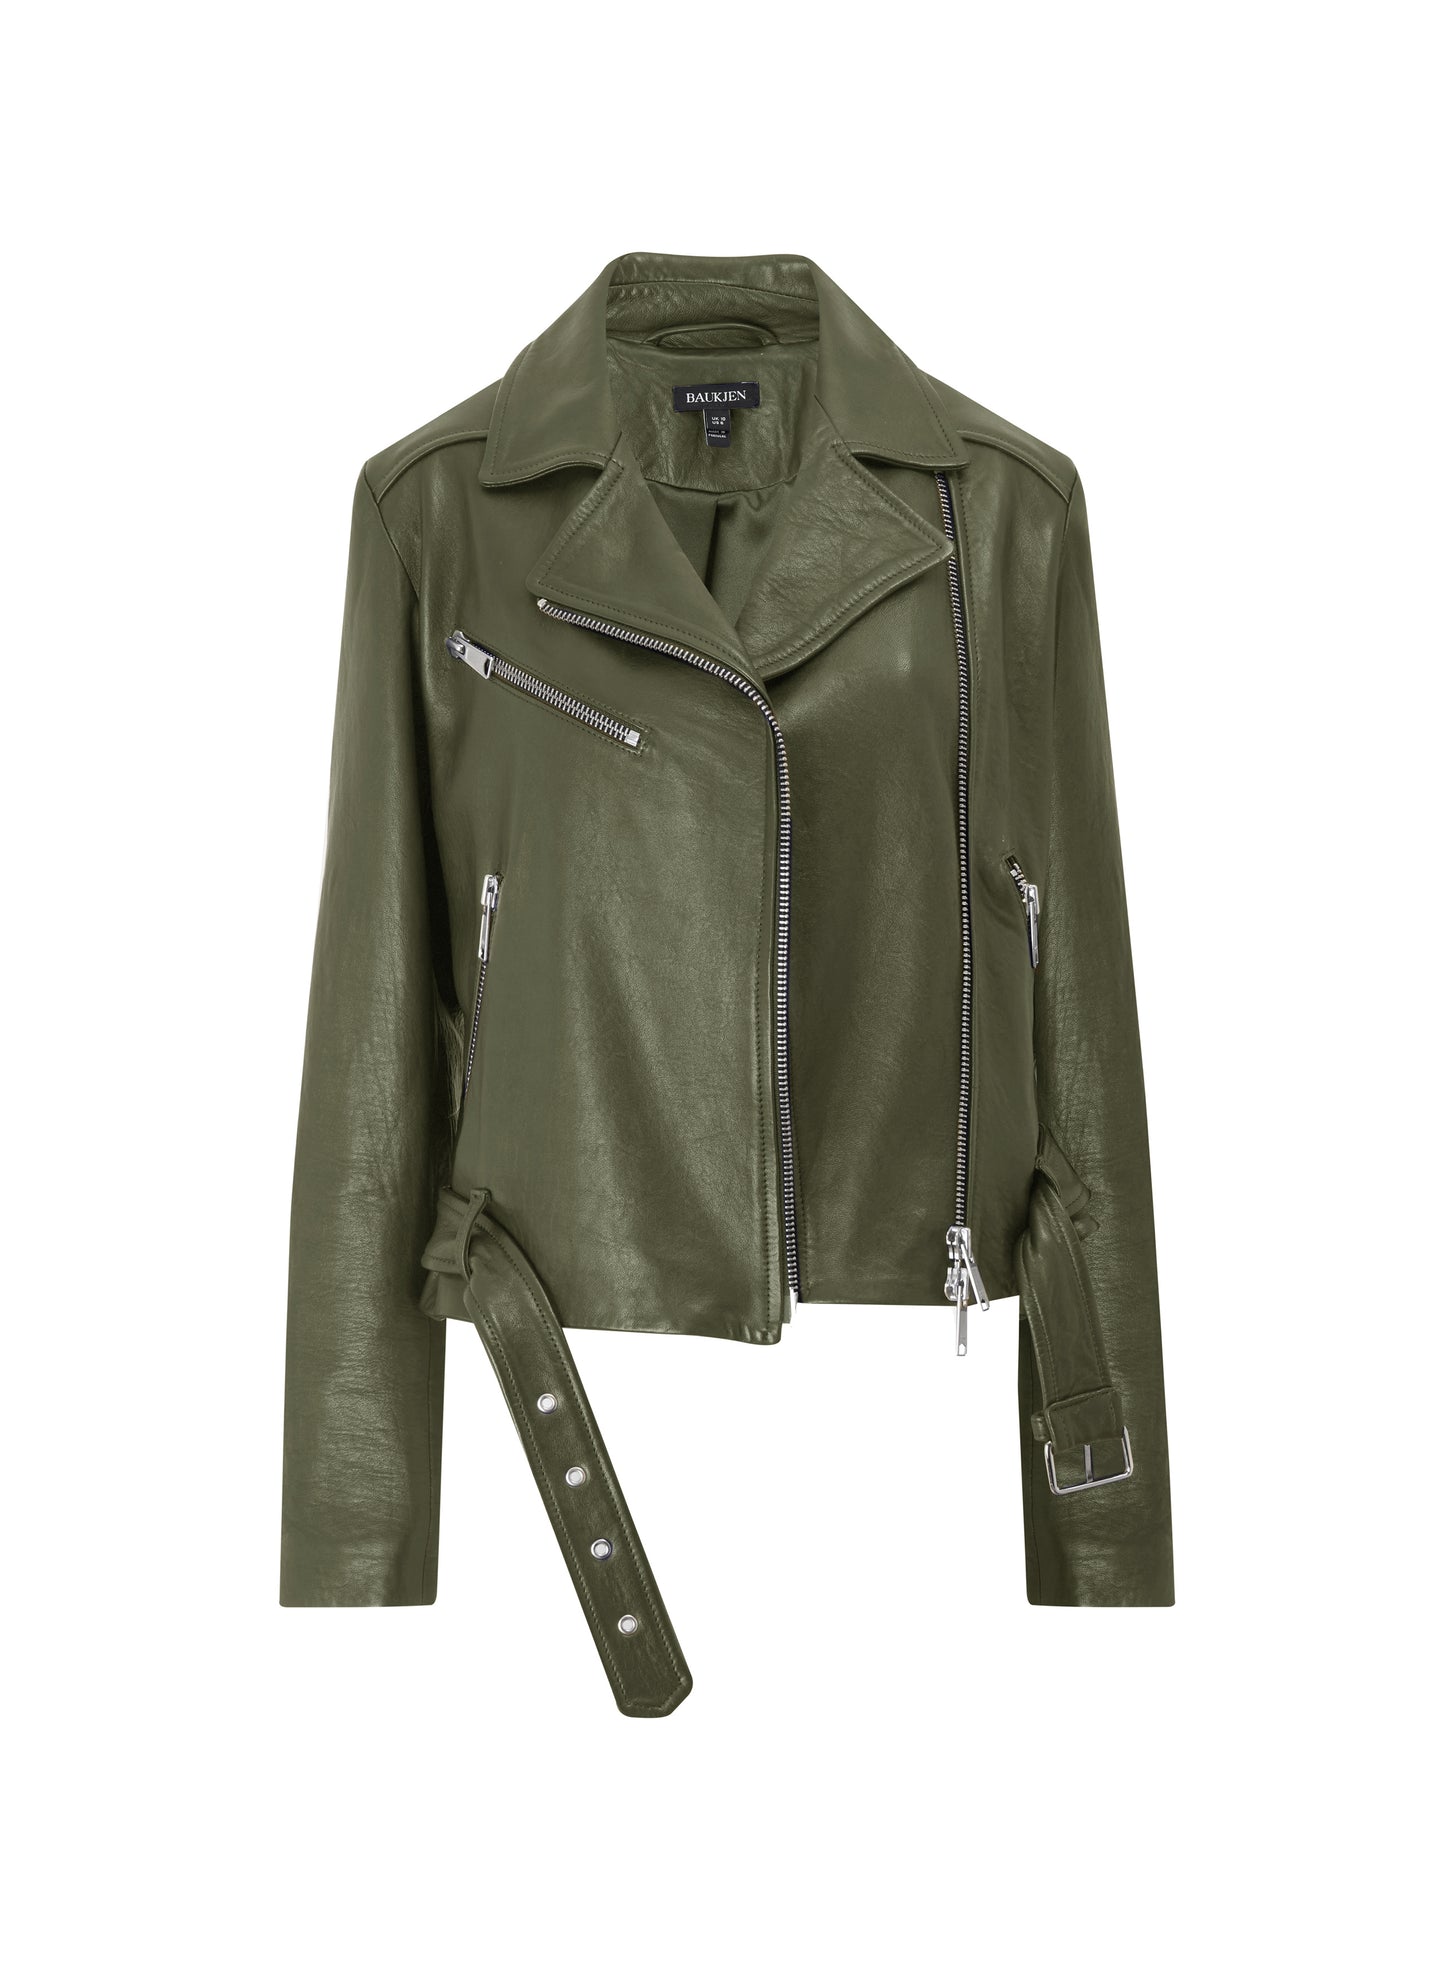 Lyle Vegetable Tanned Leather Biker